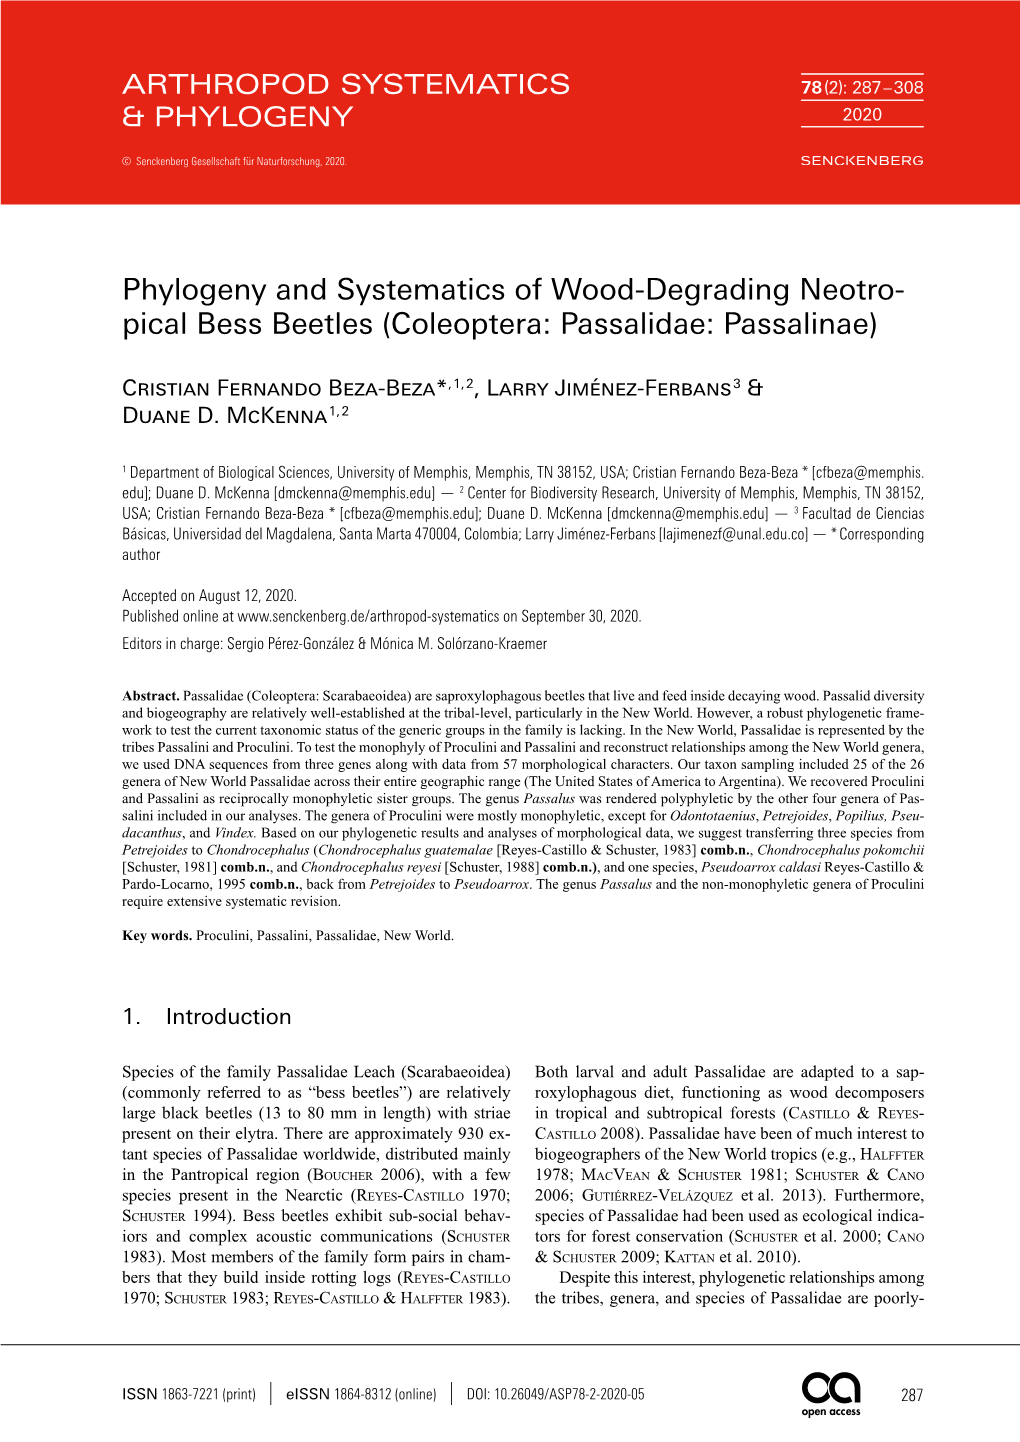 Phylogeny and Systematics of Wood-Degrading Neotropical Bess Beetles (Coleoptera: Passalidae: Passalinae)